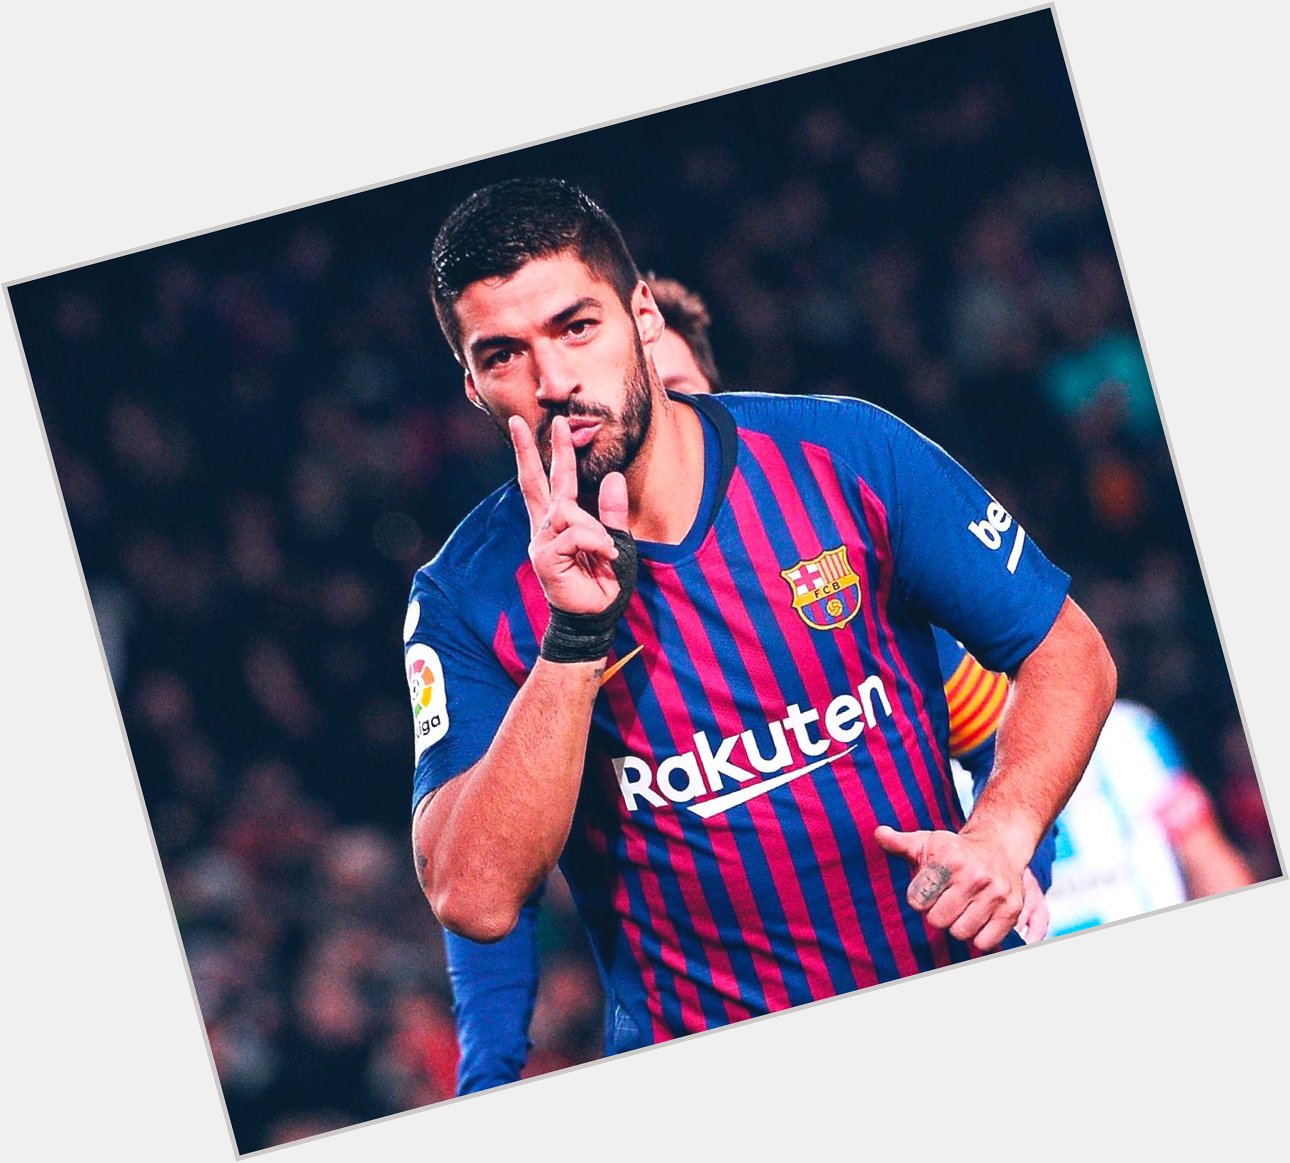 Happy birthday, Luis Suarez!

Games: 693. Goals: 442. Trophies: 17. 

One of the greatest strikers! 